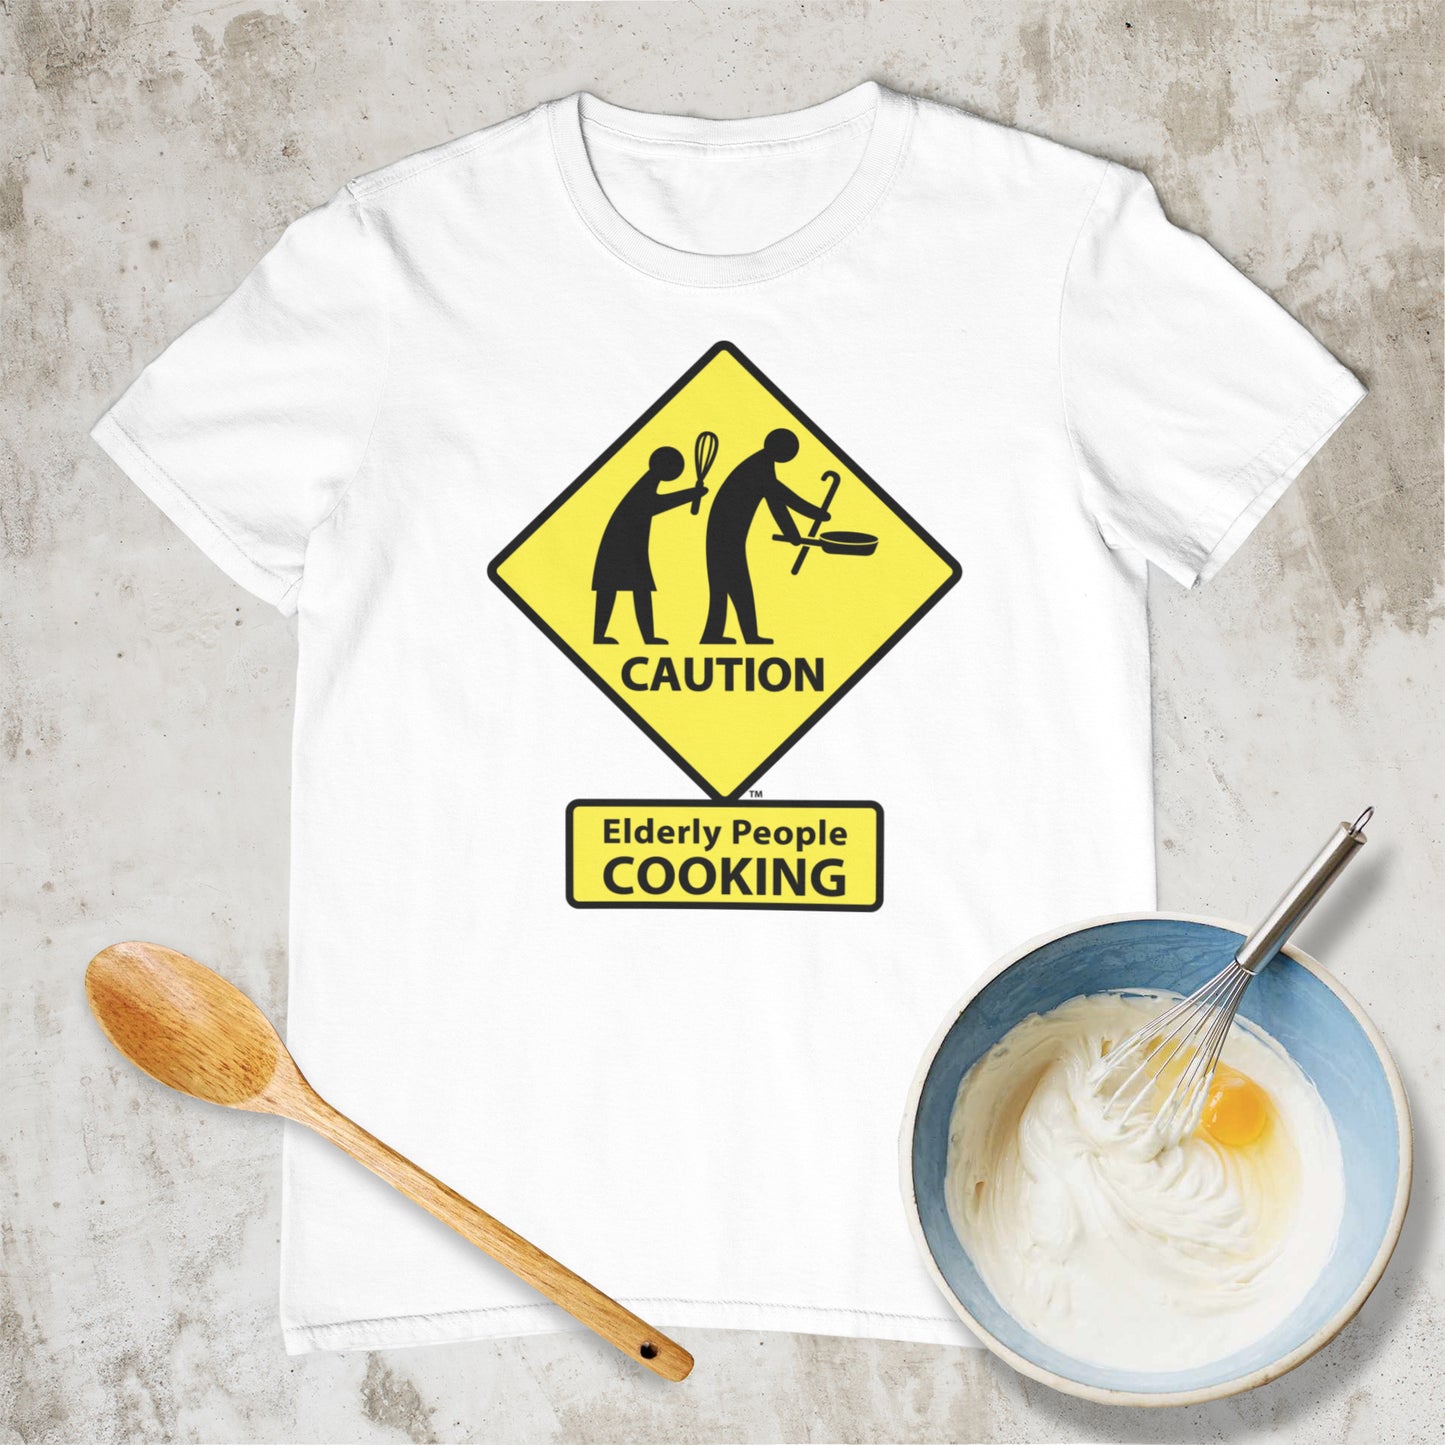 Caution: Elderly People COOKING T-shirt